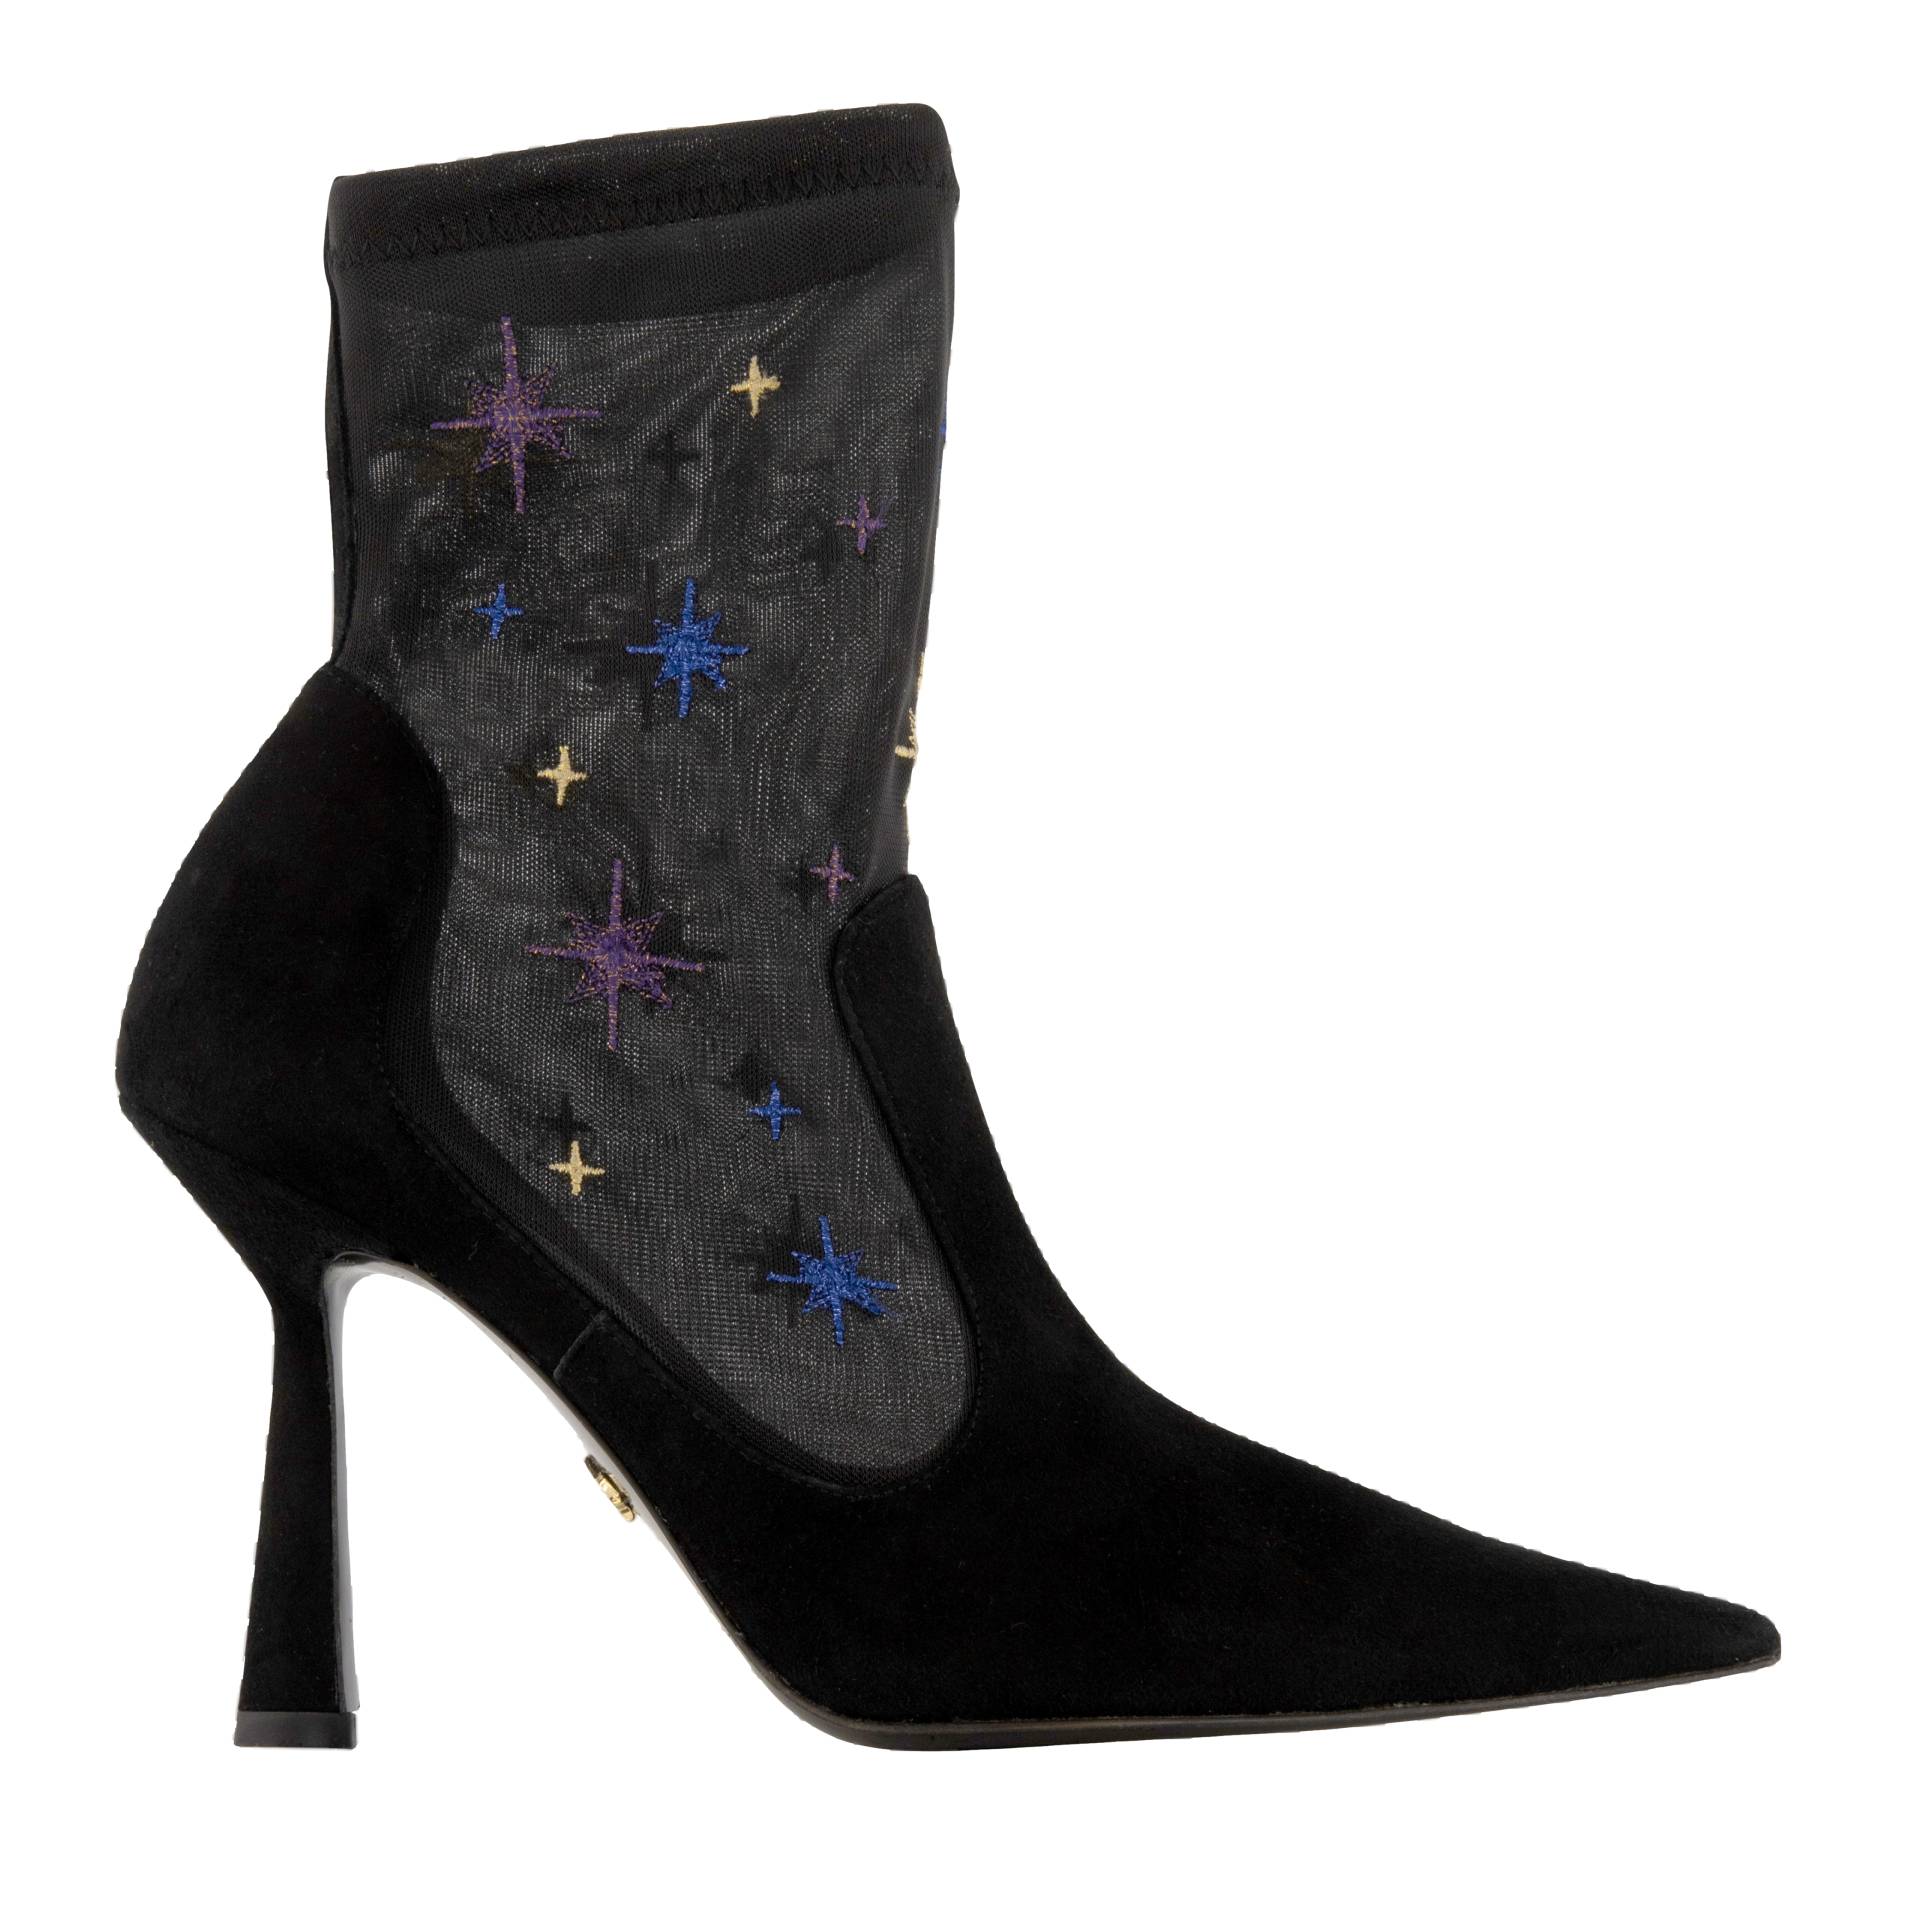 Anna Boot 95 Black Suede and Star Embroidery von ATANA